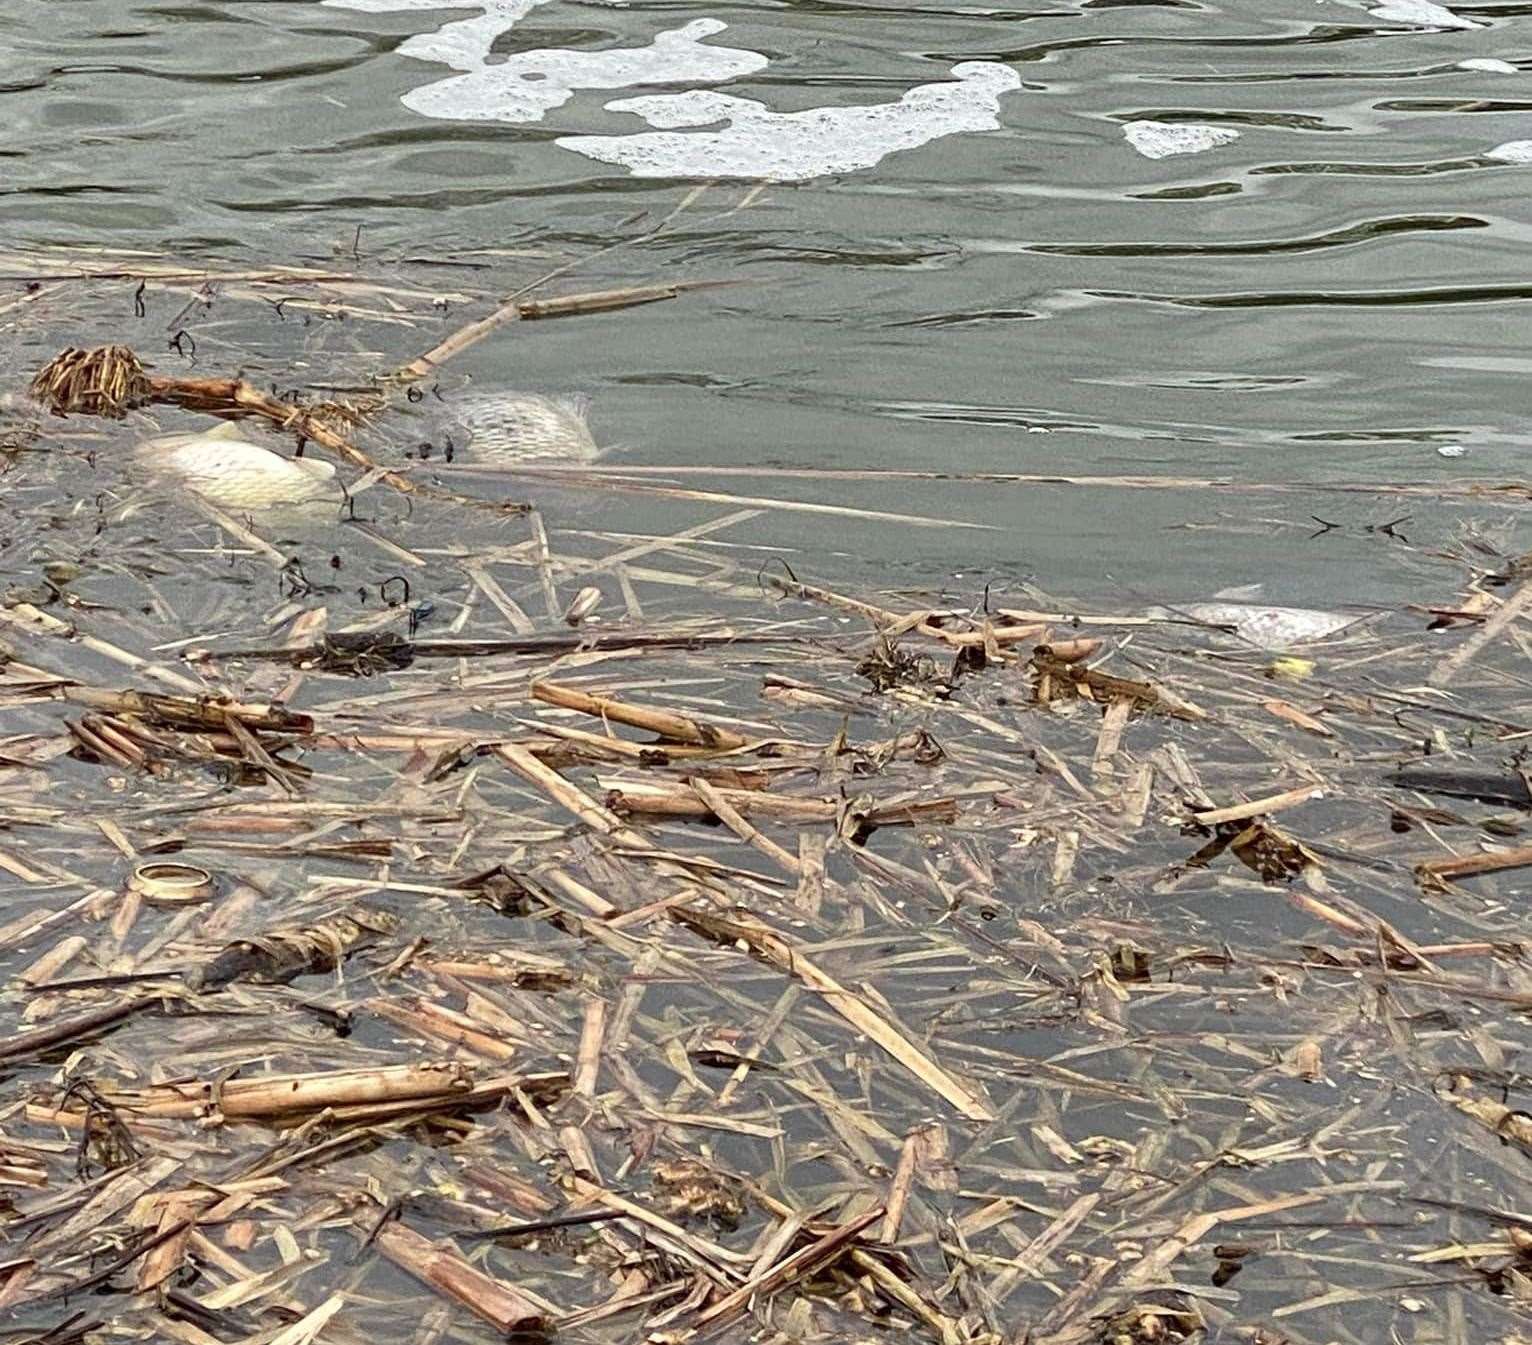 Dead fish in the lake at Gravesend Promenade. Image from Tracy Smithson (55441885)